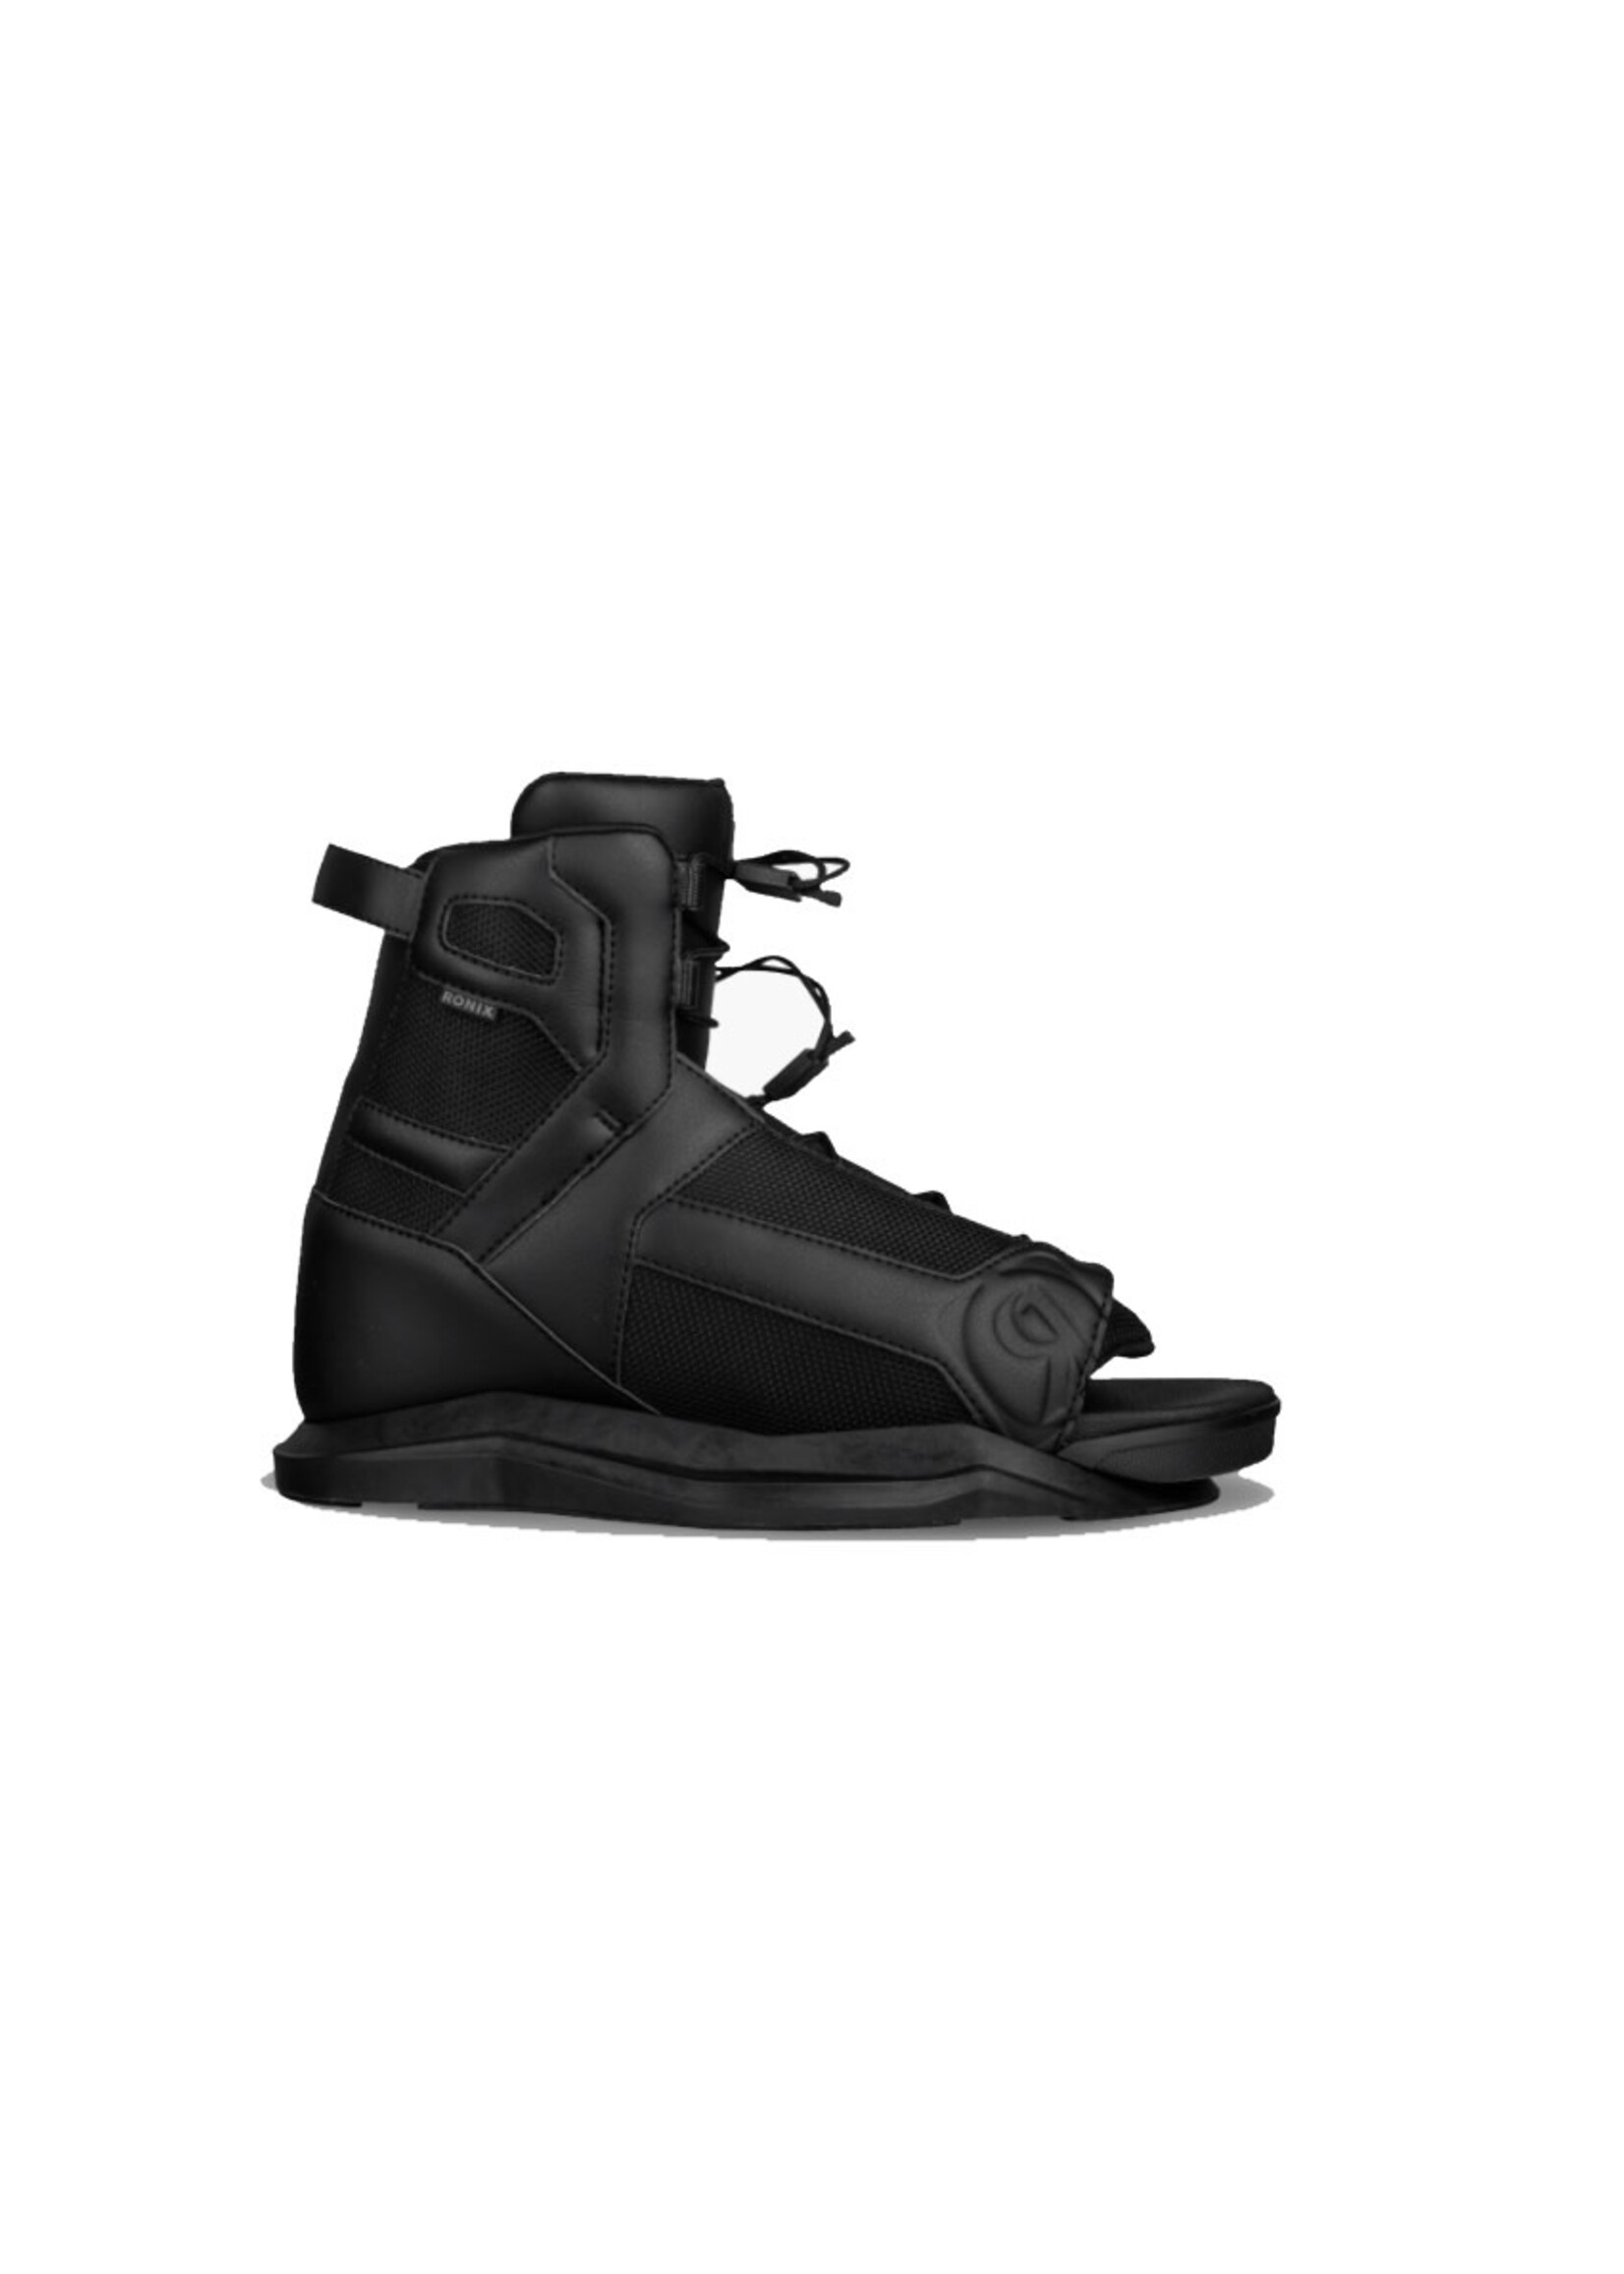 Ronix Divide Boot